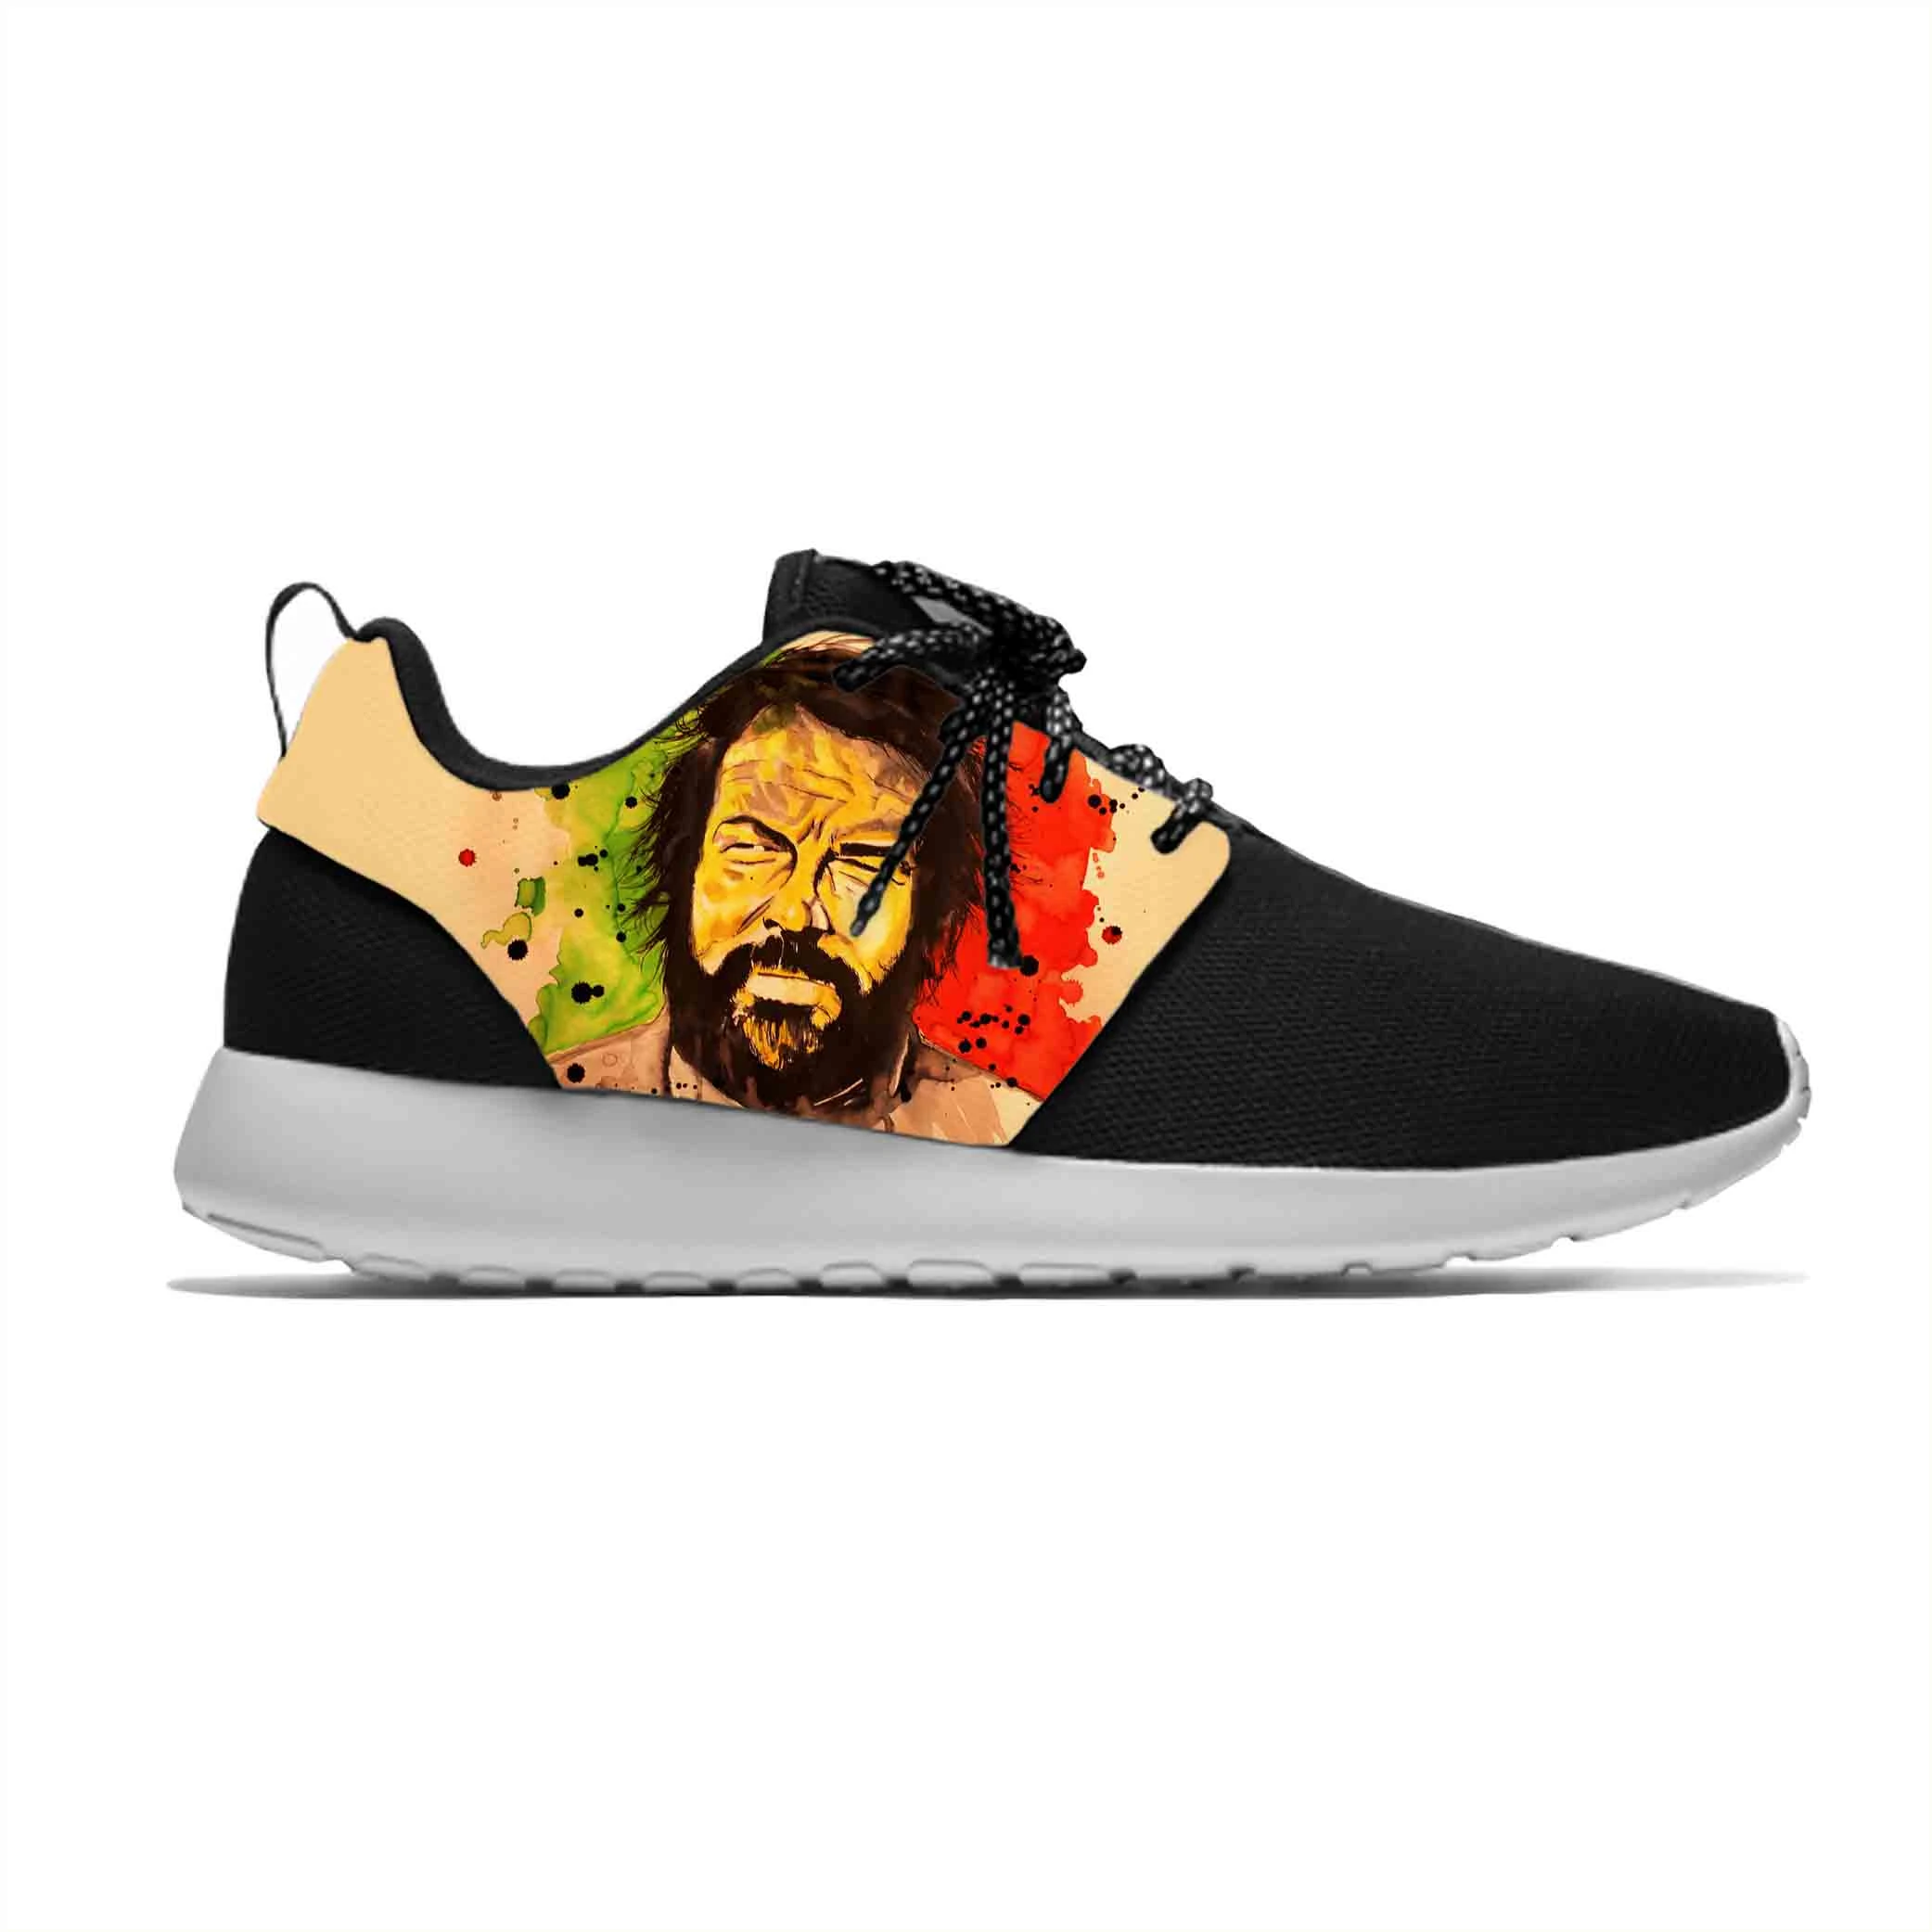 Anime Cartoon Manga Movie Actor Funny Bud Spencer Hot Sport Shoes  Breathable Lightweight Men Women Sneakers Mesh Running Shoes - Non-leather  Casual Shoes - AliExpress